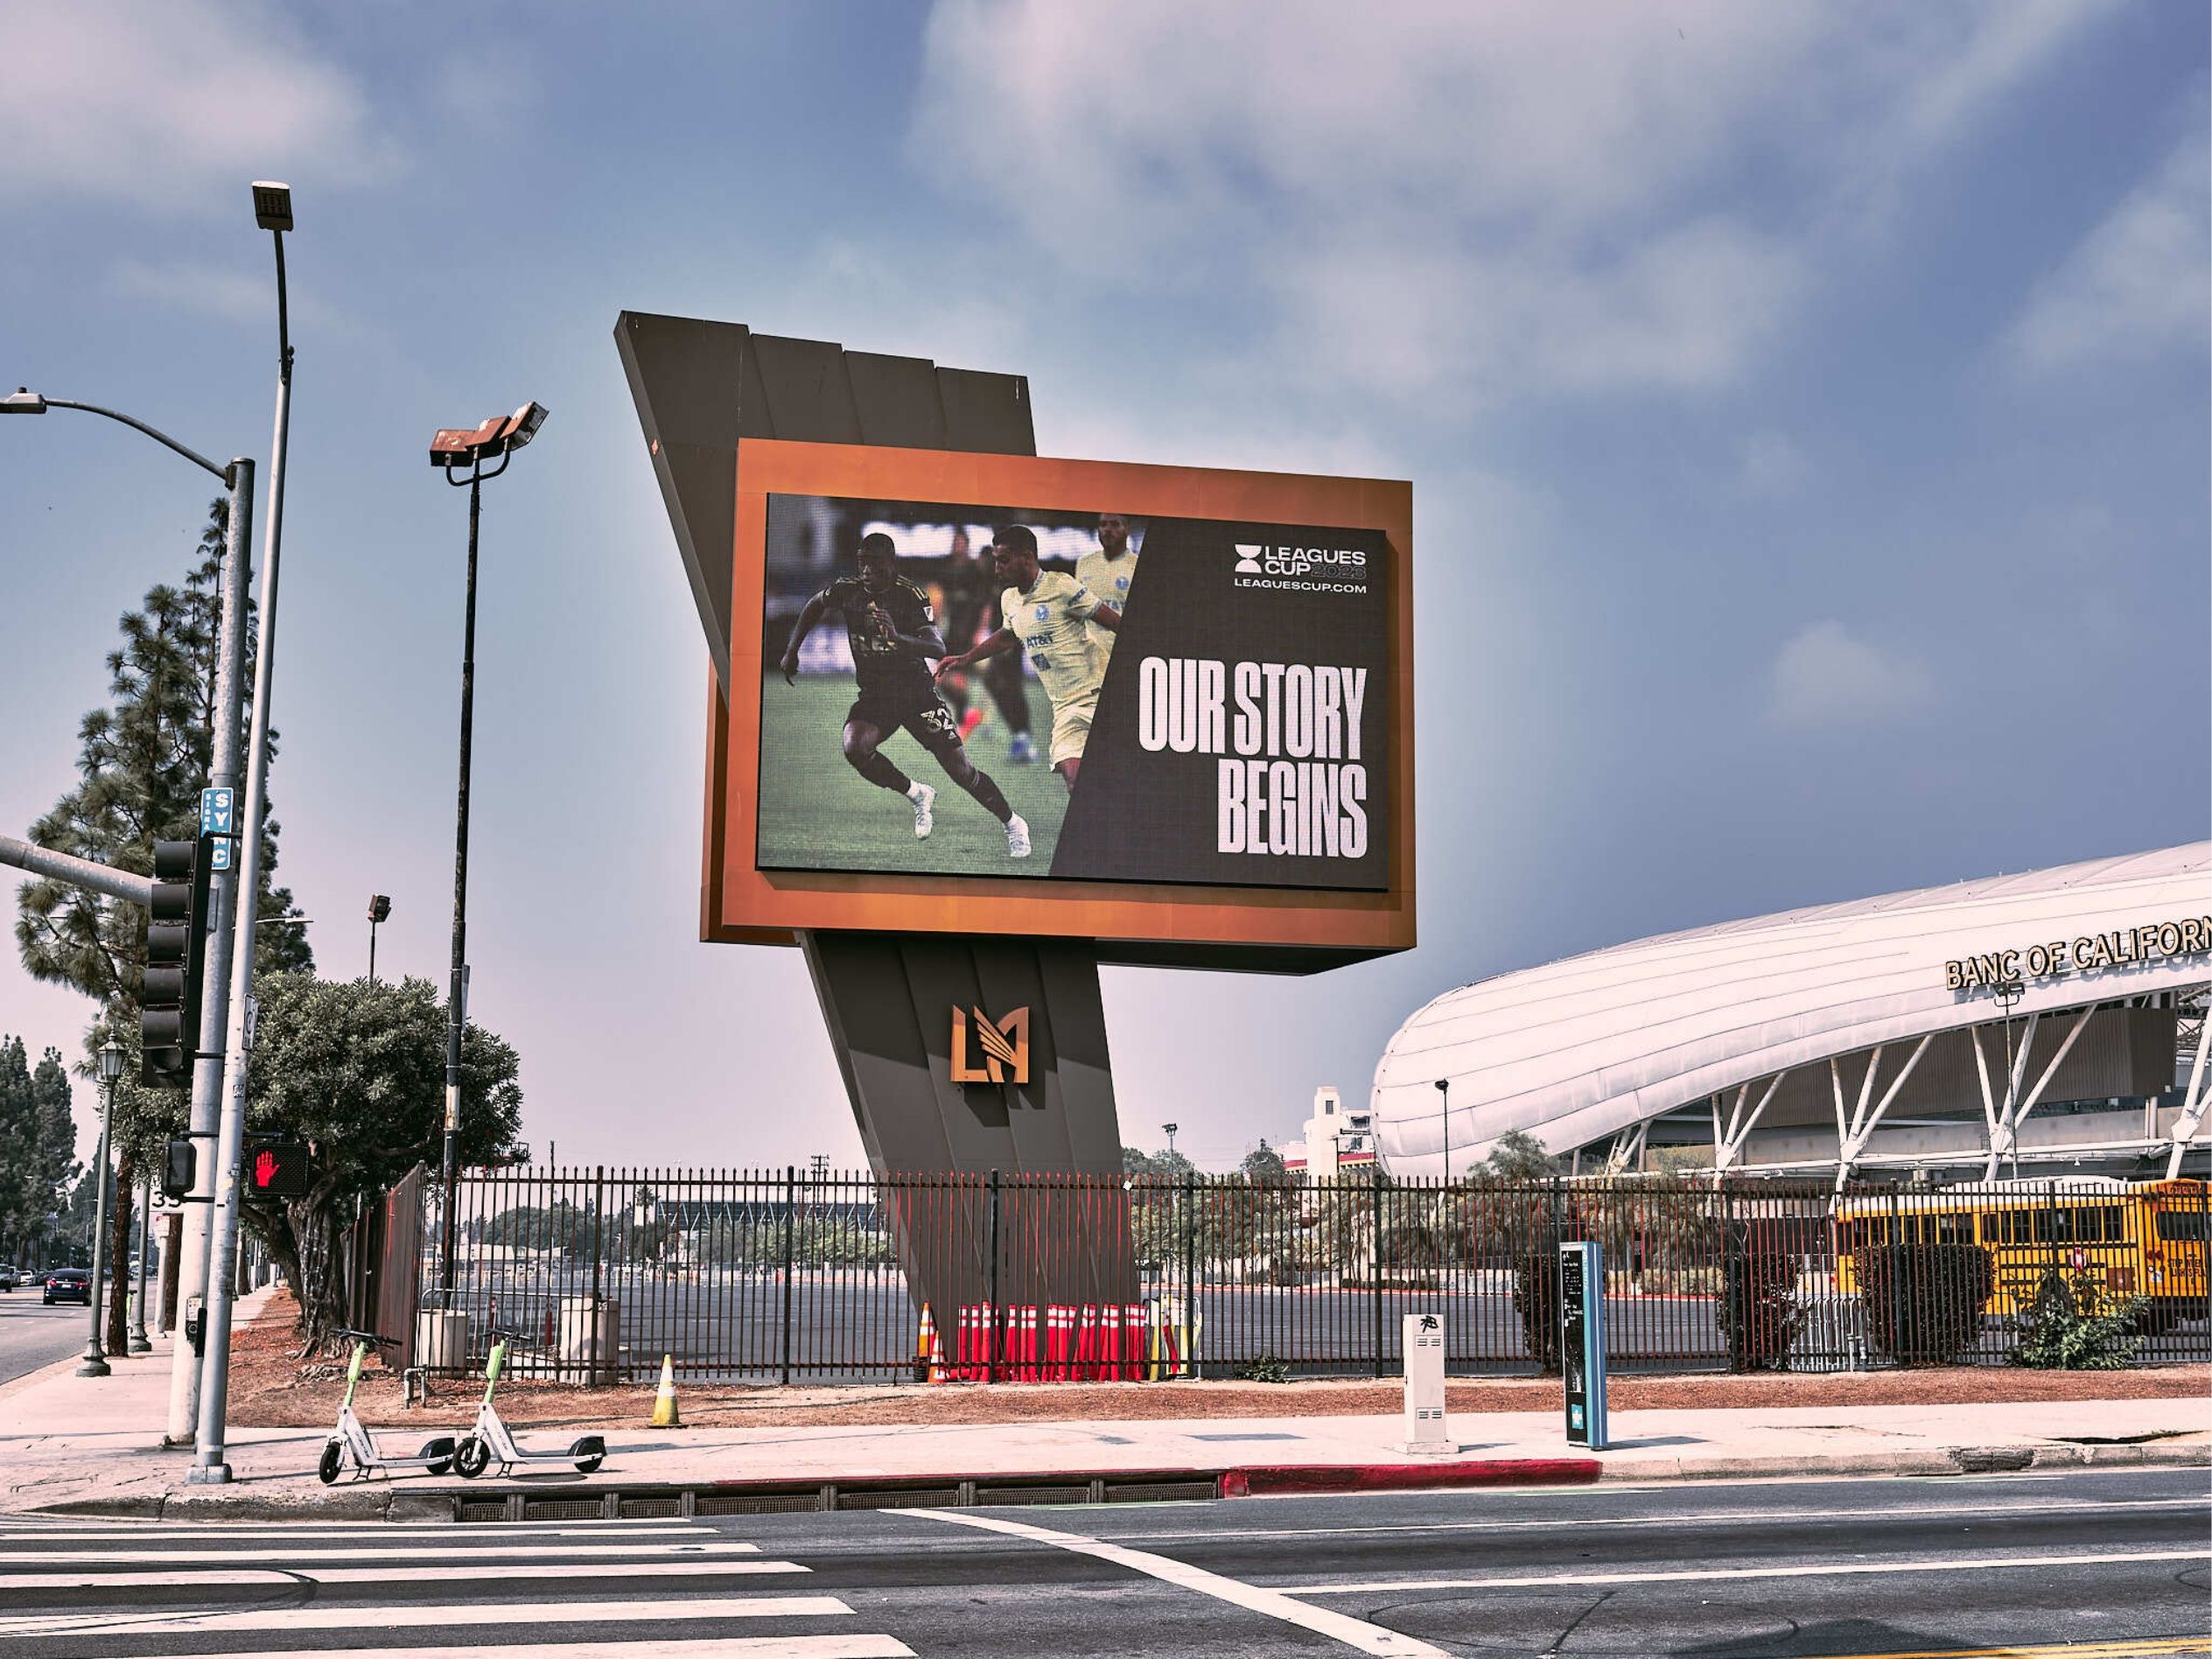 Large Leagues Cup Our story begins billboard in front of Banc of California stadium